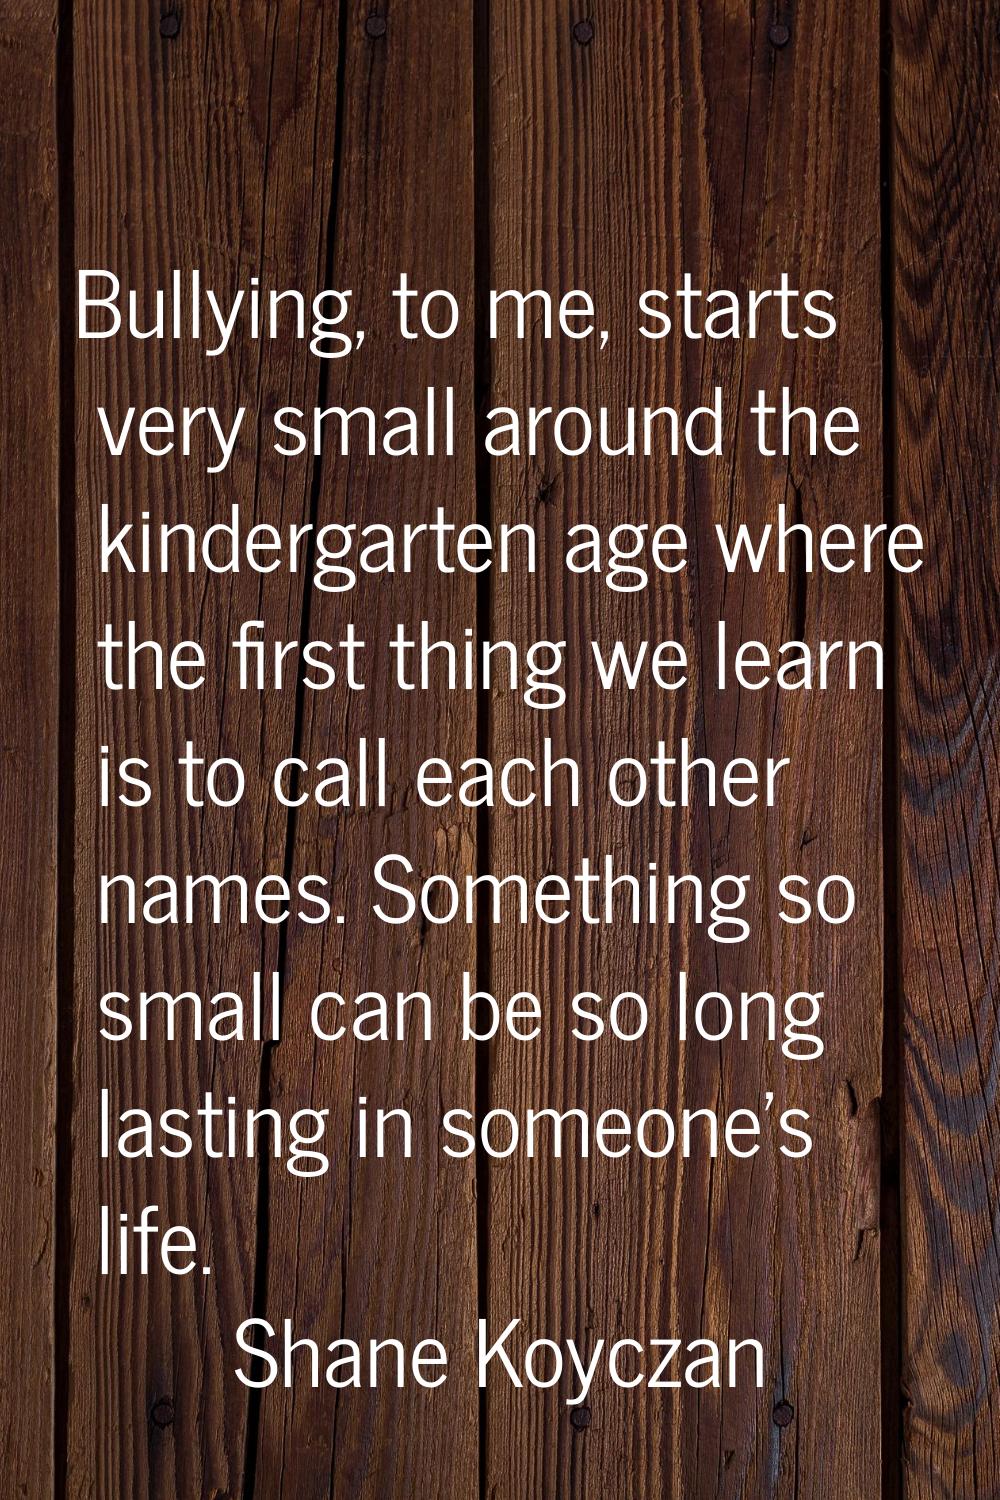 Bullying, to me, starts very small around the kindergarten age where the first thing we learn is to